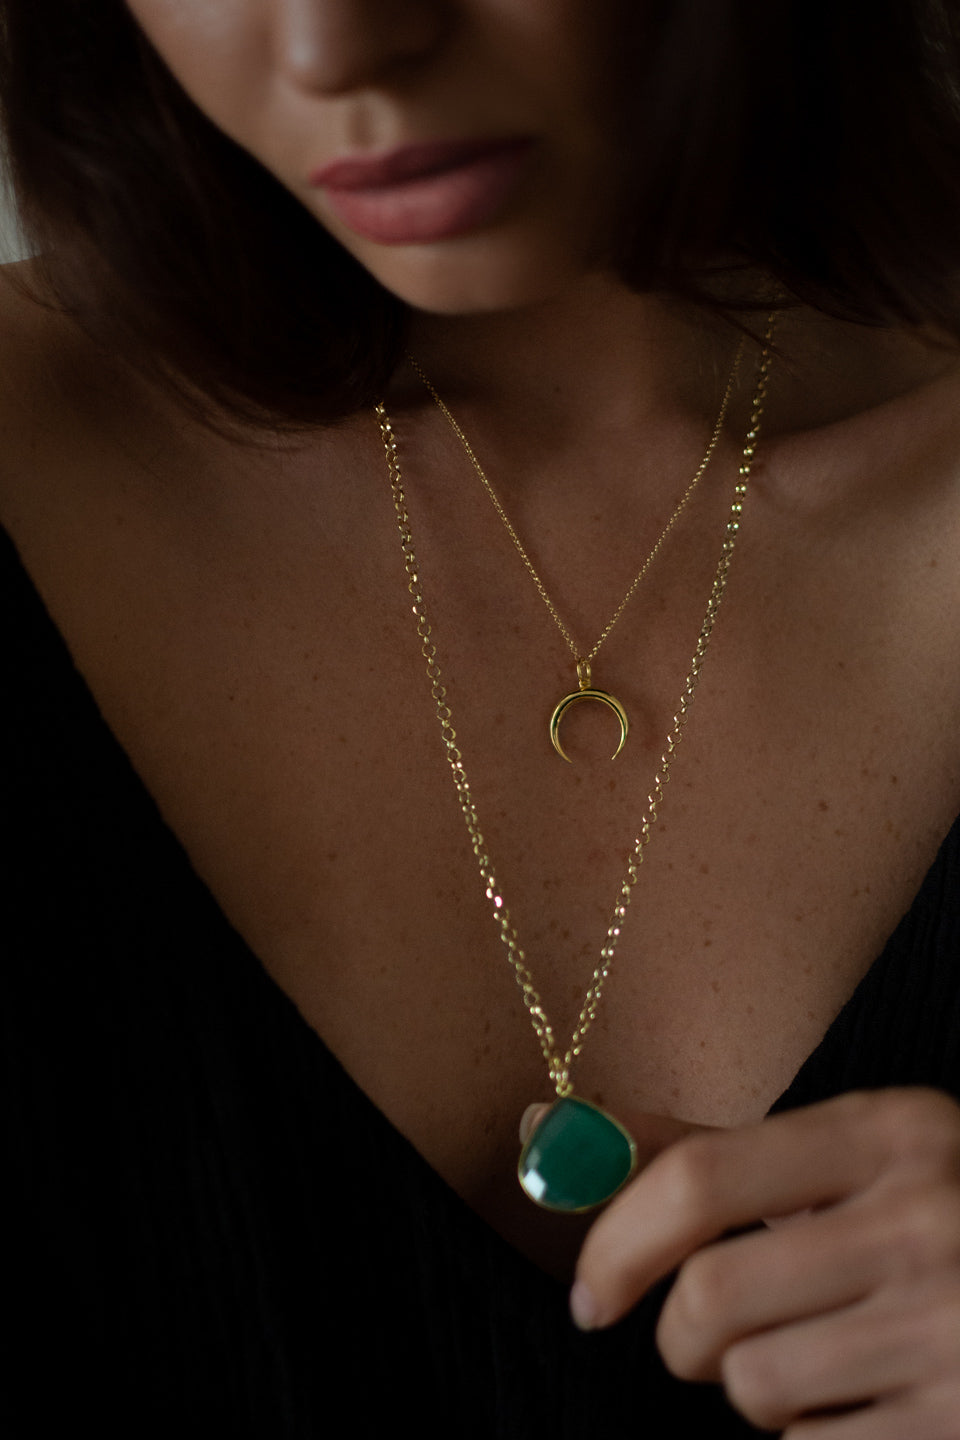 Green Onyx Heart Necklace from One Dame Lane